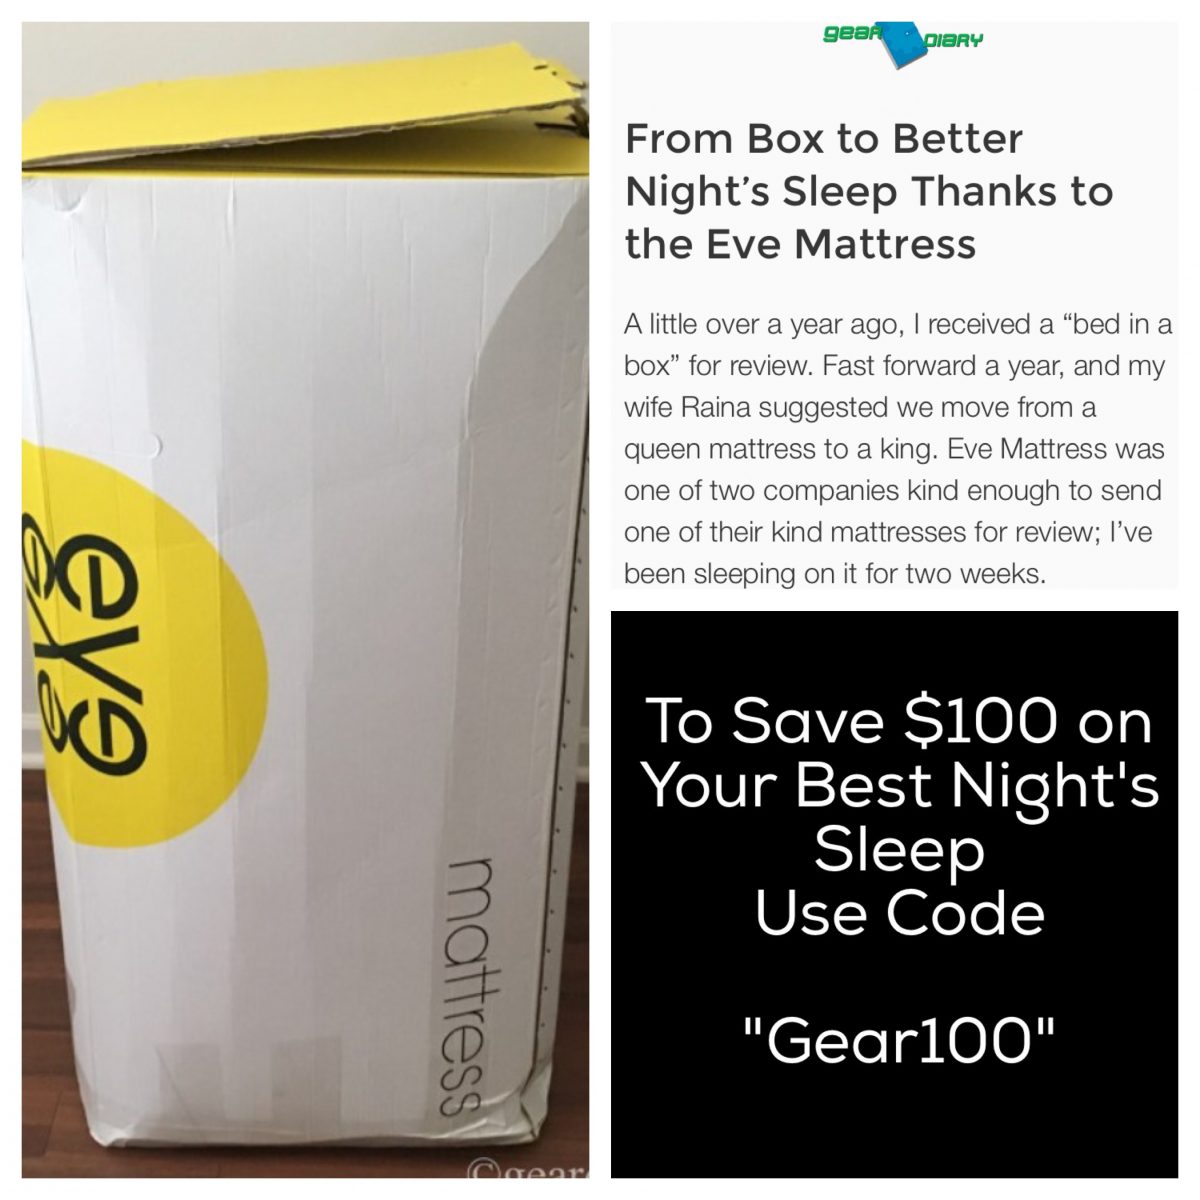 Gear Diary’s Review of the Eve Mattress Featured on Their Site: Check It Out and Save!